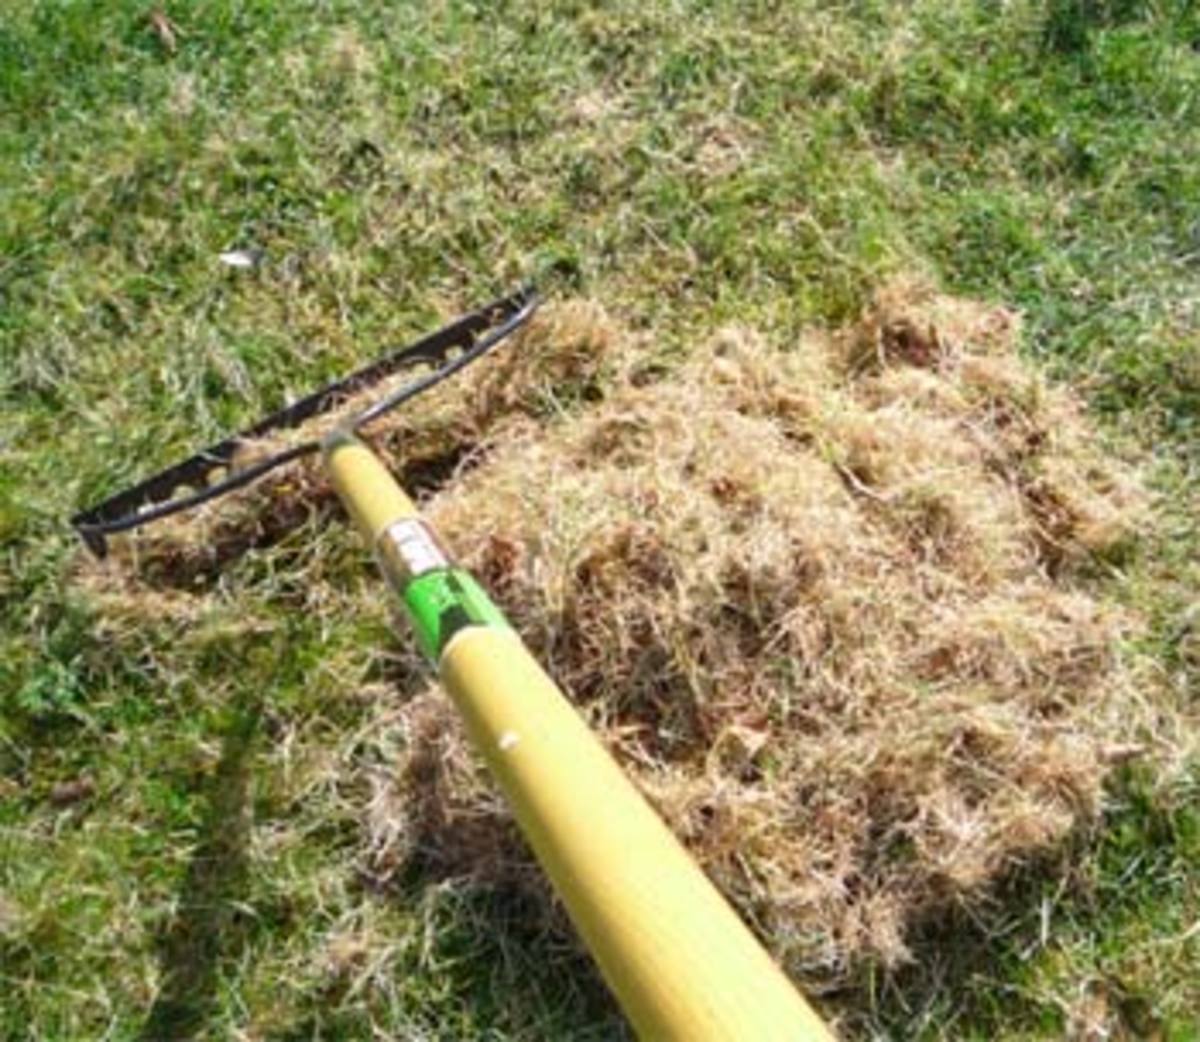 Raking thatch and removing plant debris help lawns to absorb water and nutrients. Aeration encourages the flow of oxygen to grass roots. 